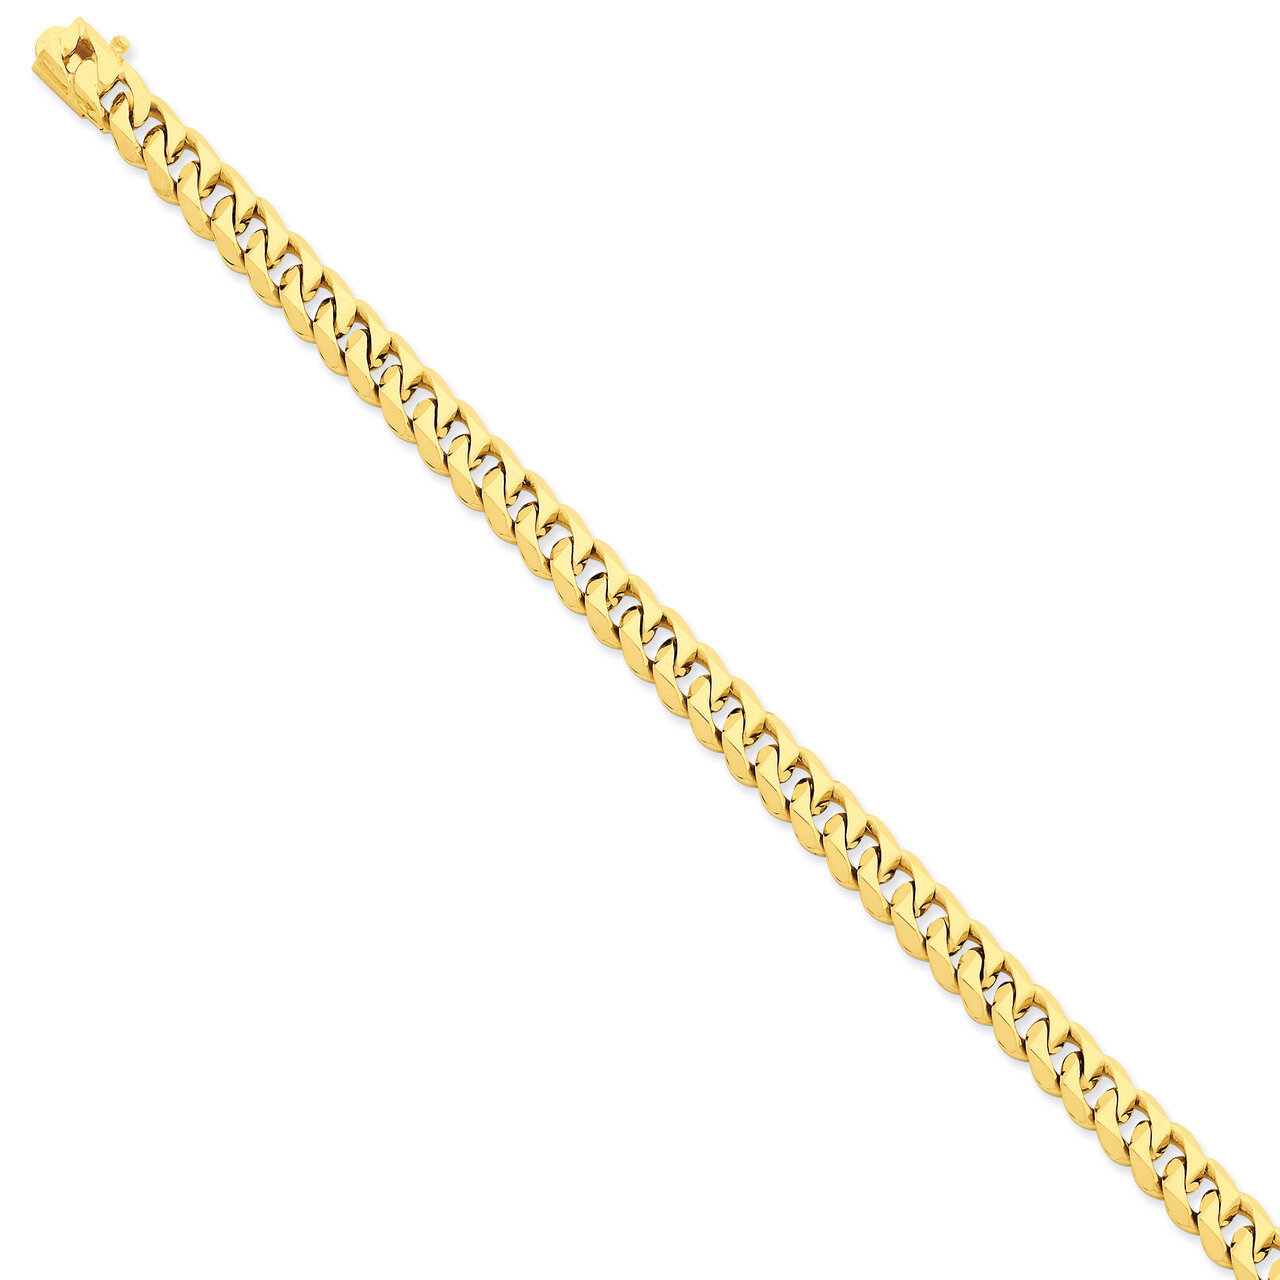 7mm Hand-polished Traditional Link Chain 20 Inch 14k Gold LK117-20